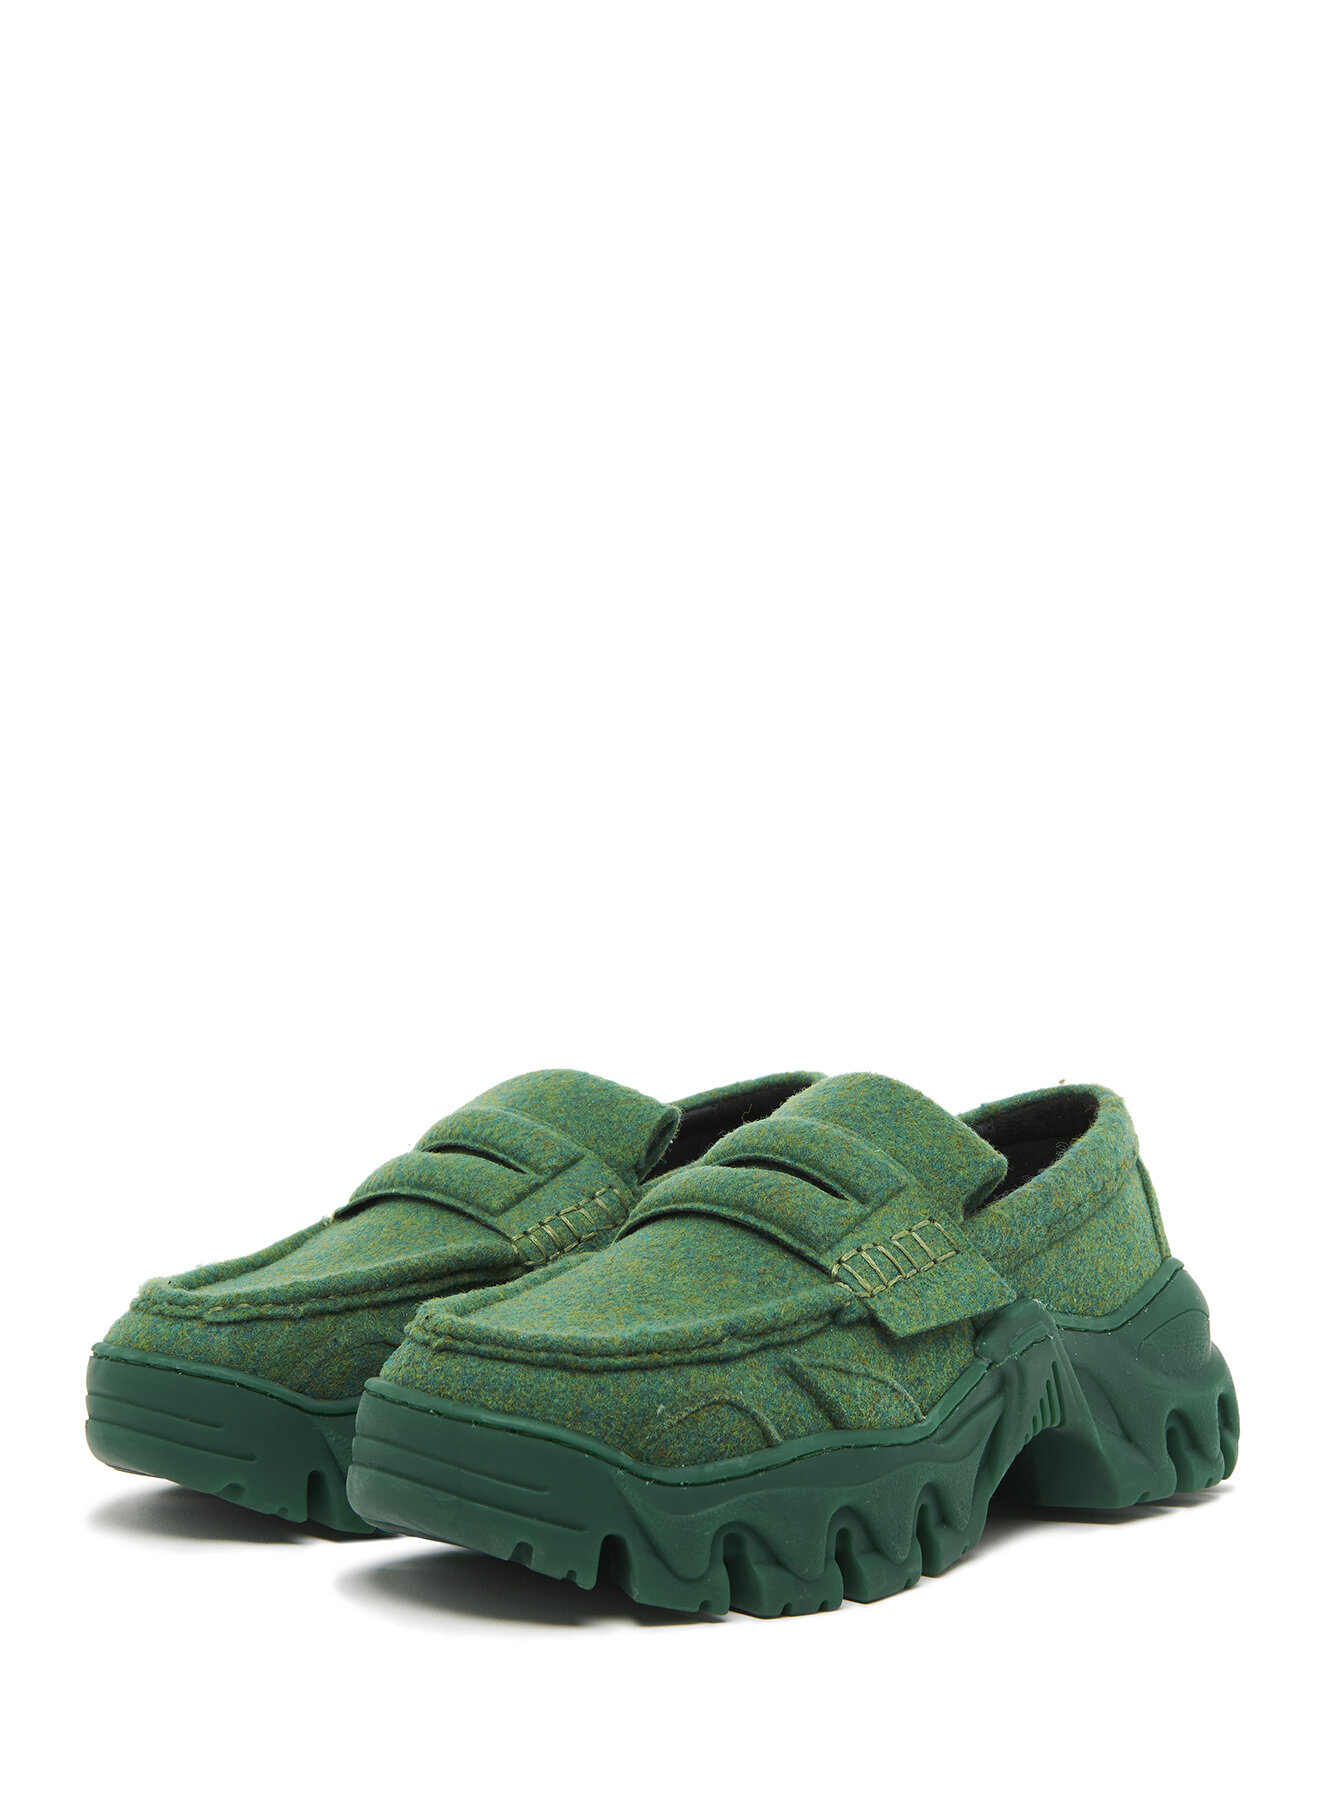 BOCCACCIO II PADDED LOAFER RECYCLED FELT GREEN_FRONT.jpg